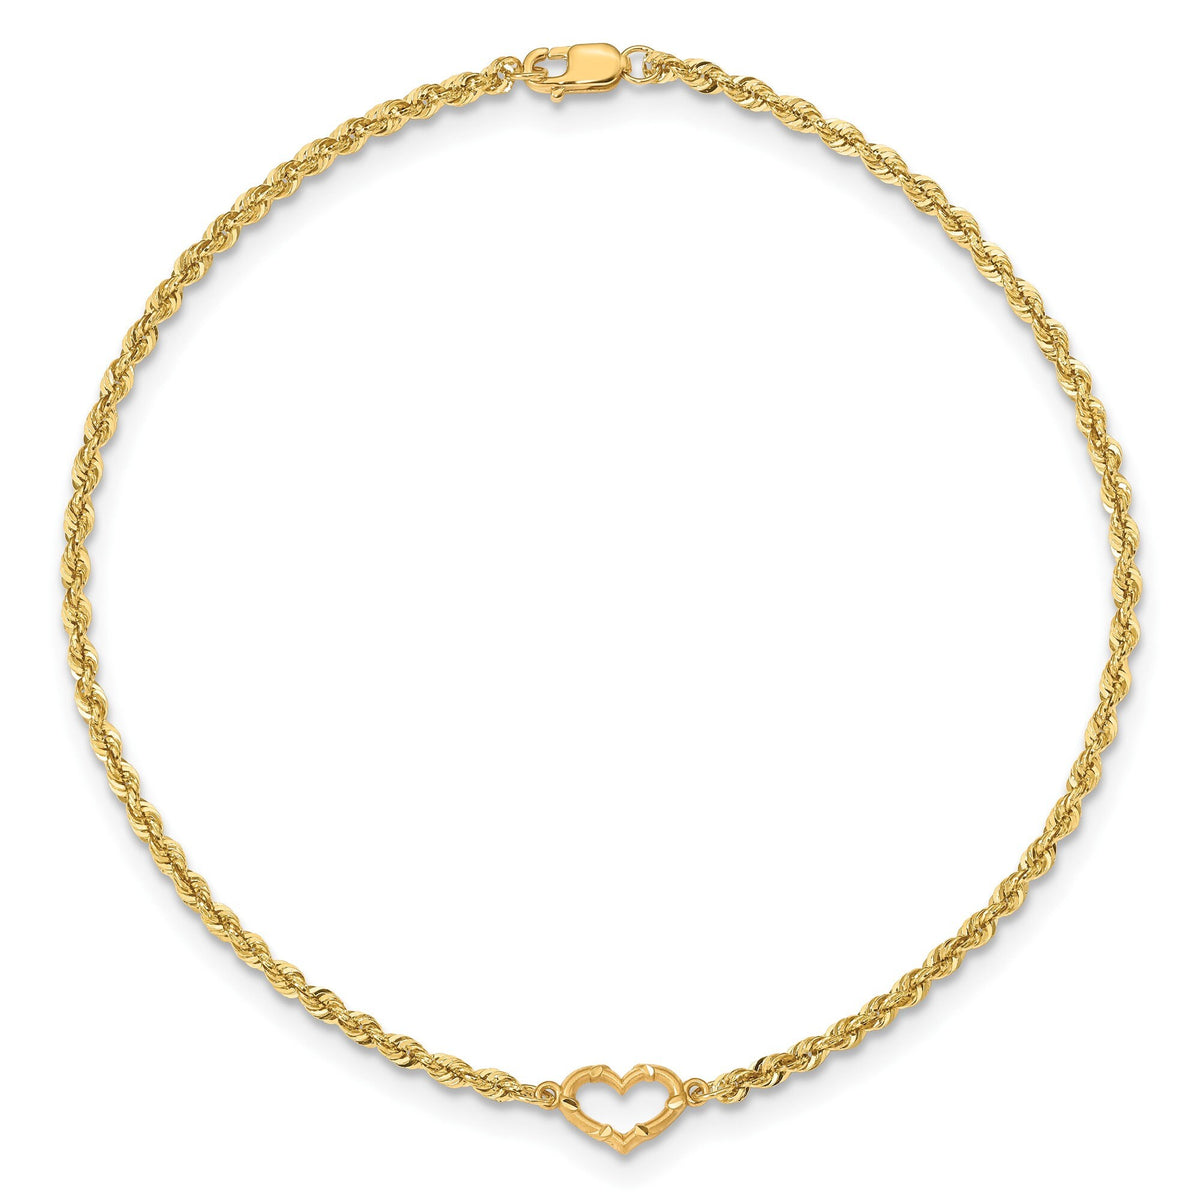 14k Yellow Gold Diamond-cut Open Heart Rope 9 inches or 10 inches - Gift Box Included